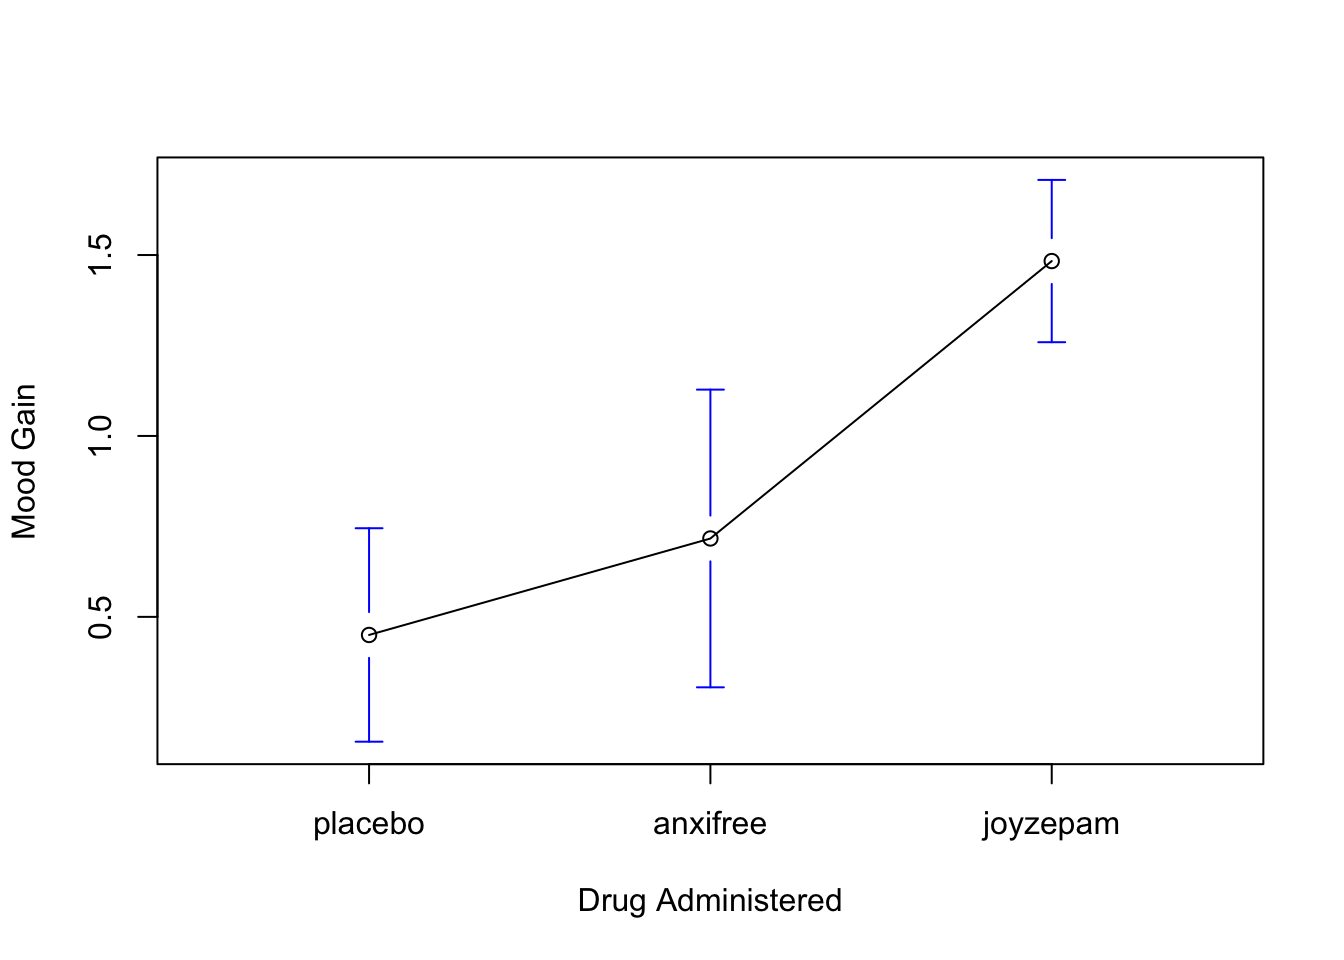 Average mood gain as a function of drug administered. Error bars depict 95% confidence intervals associated with each of the group means.